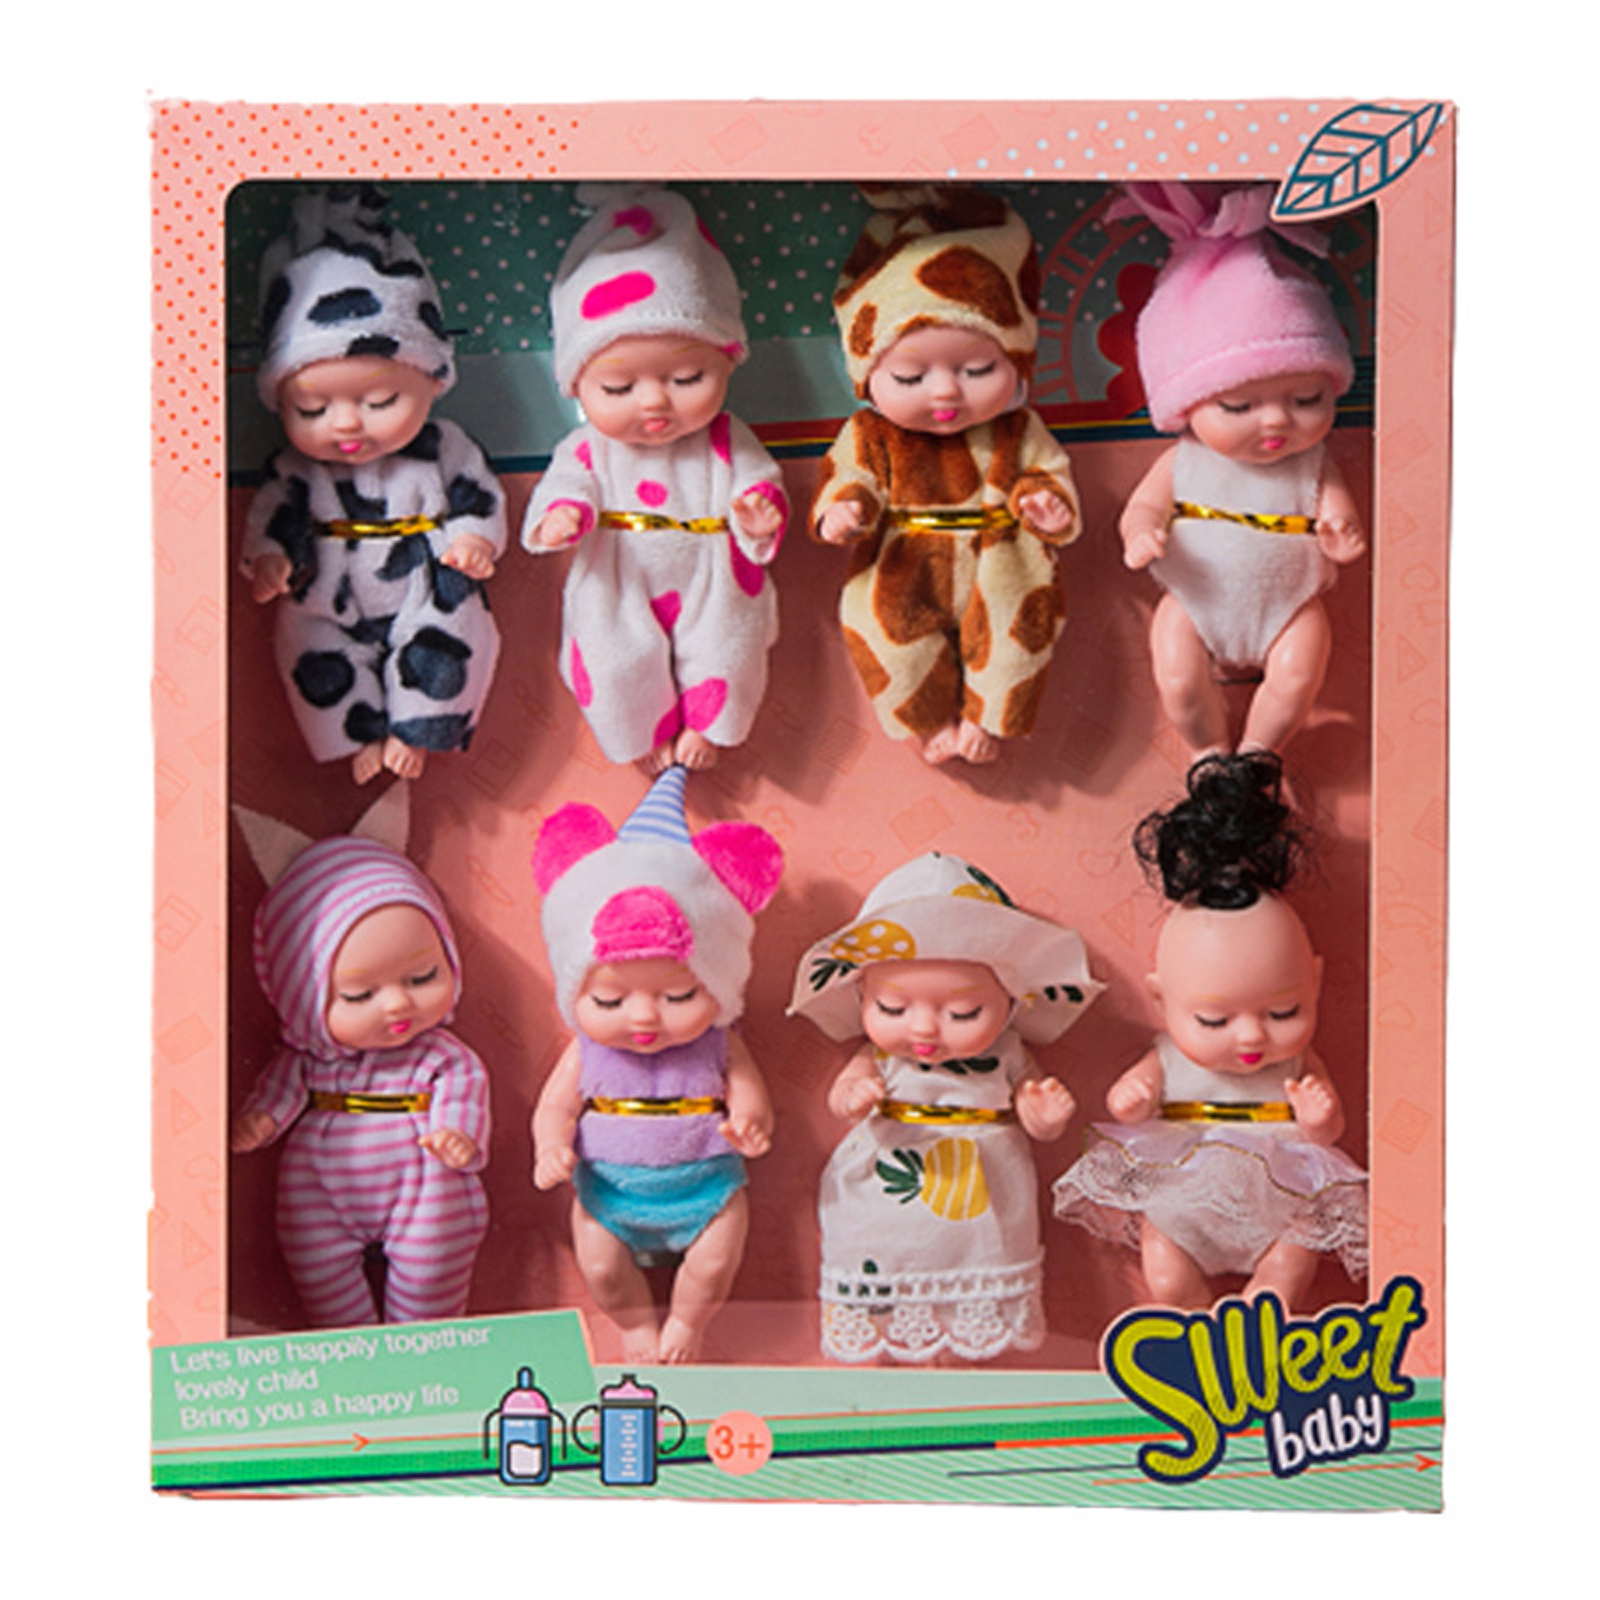 Simulation Rebirth Dolls Toy With Movable Hands Feet Mini Cute Sleeping Baby Series Doll For Kids Birthday Gift